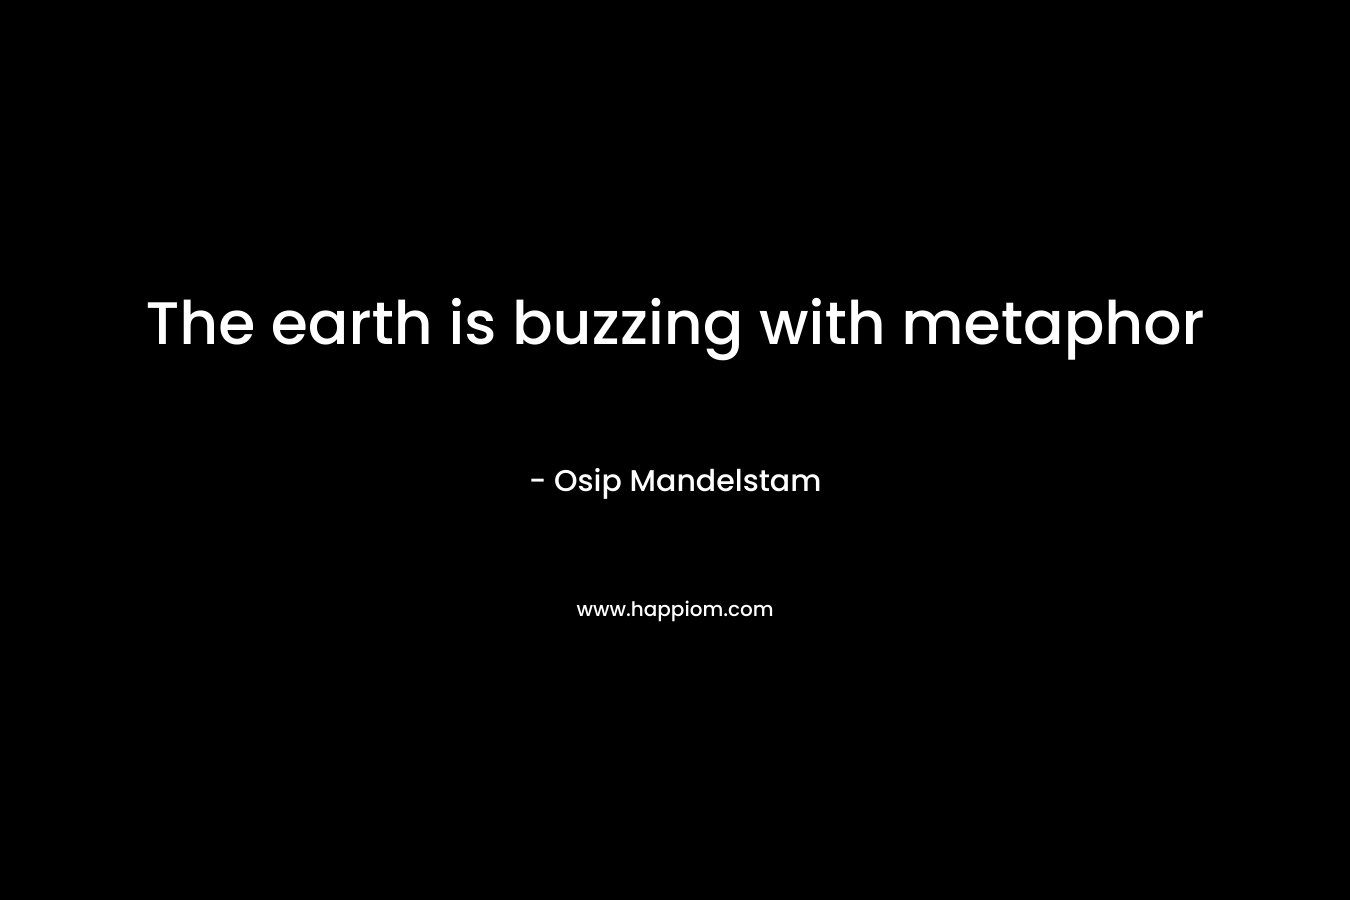 The earth is buzzing with metaphor